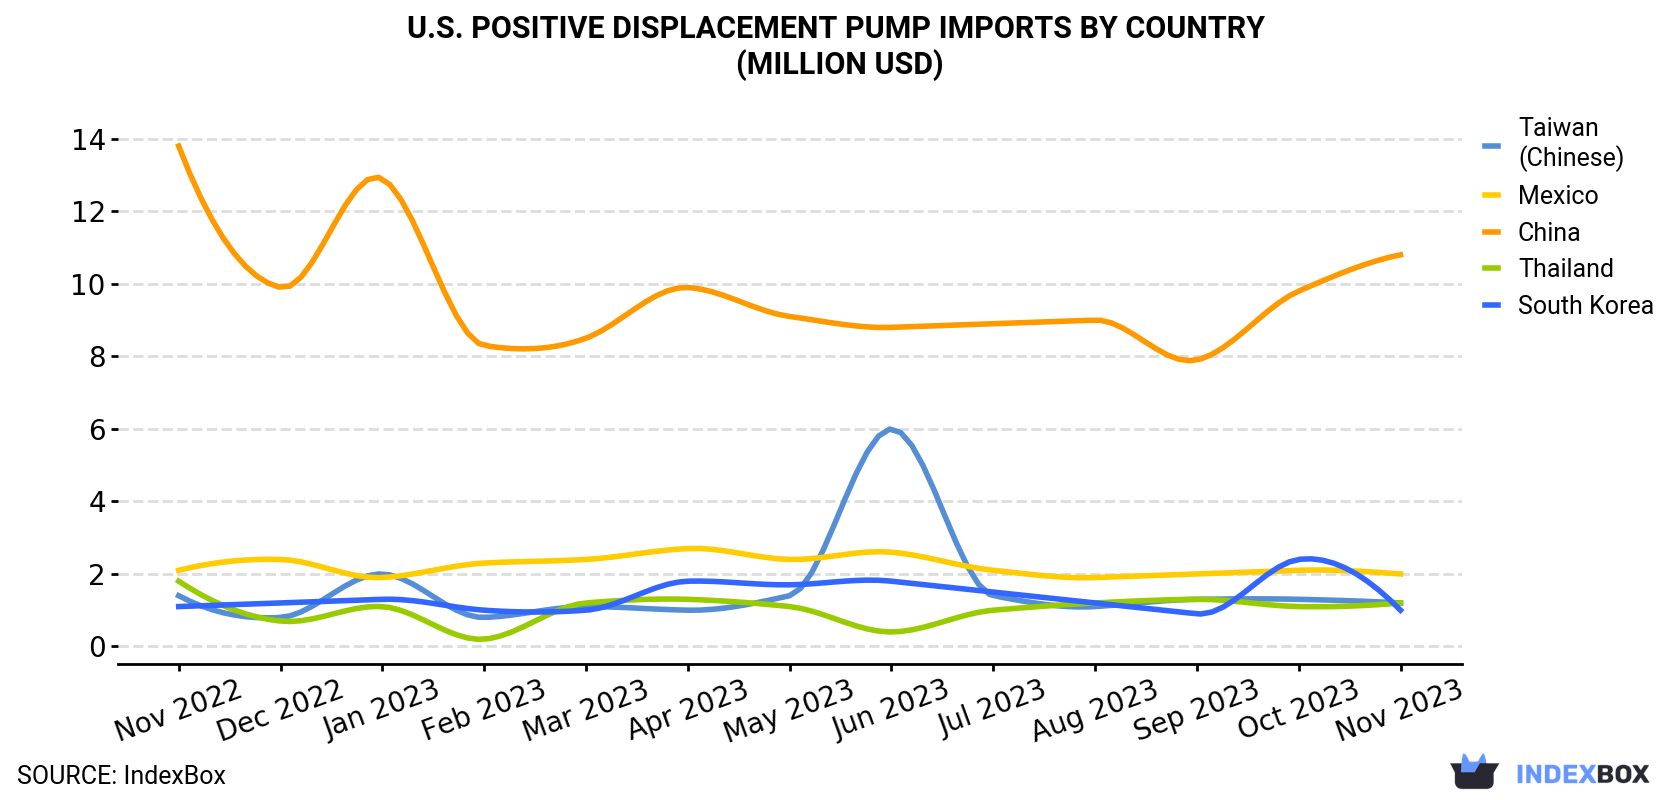 U.S. Positive Displacement Pump Imports By Country (Million USD)